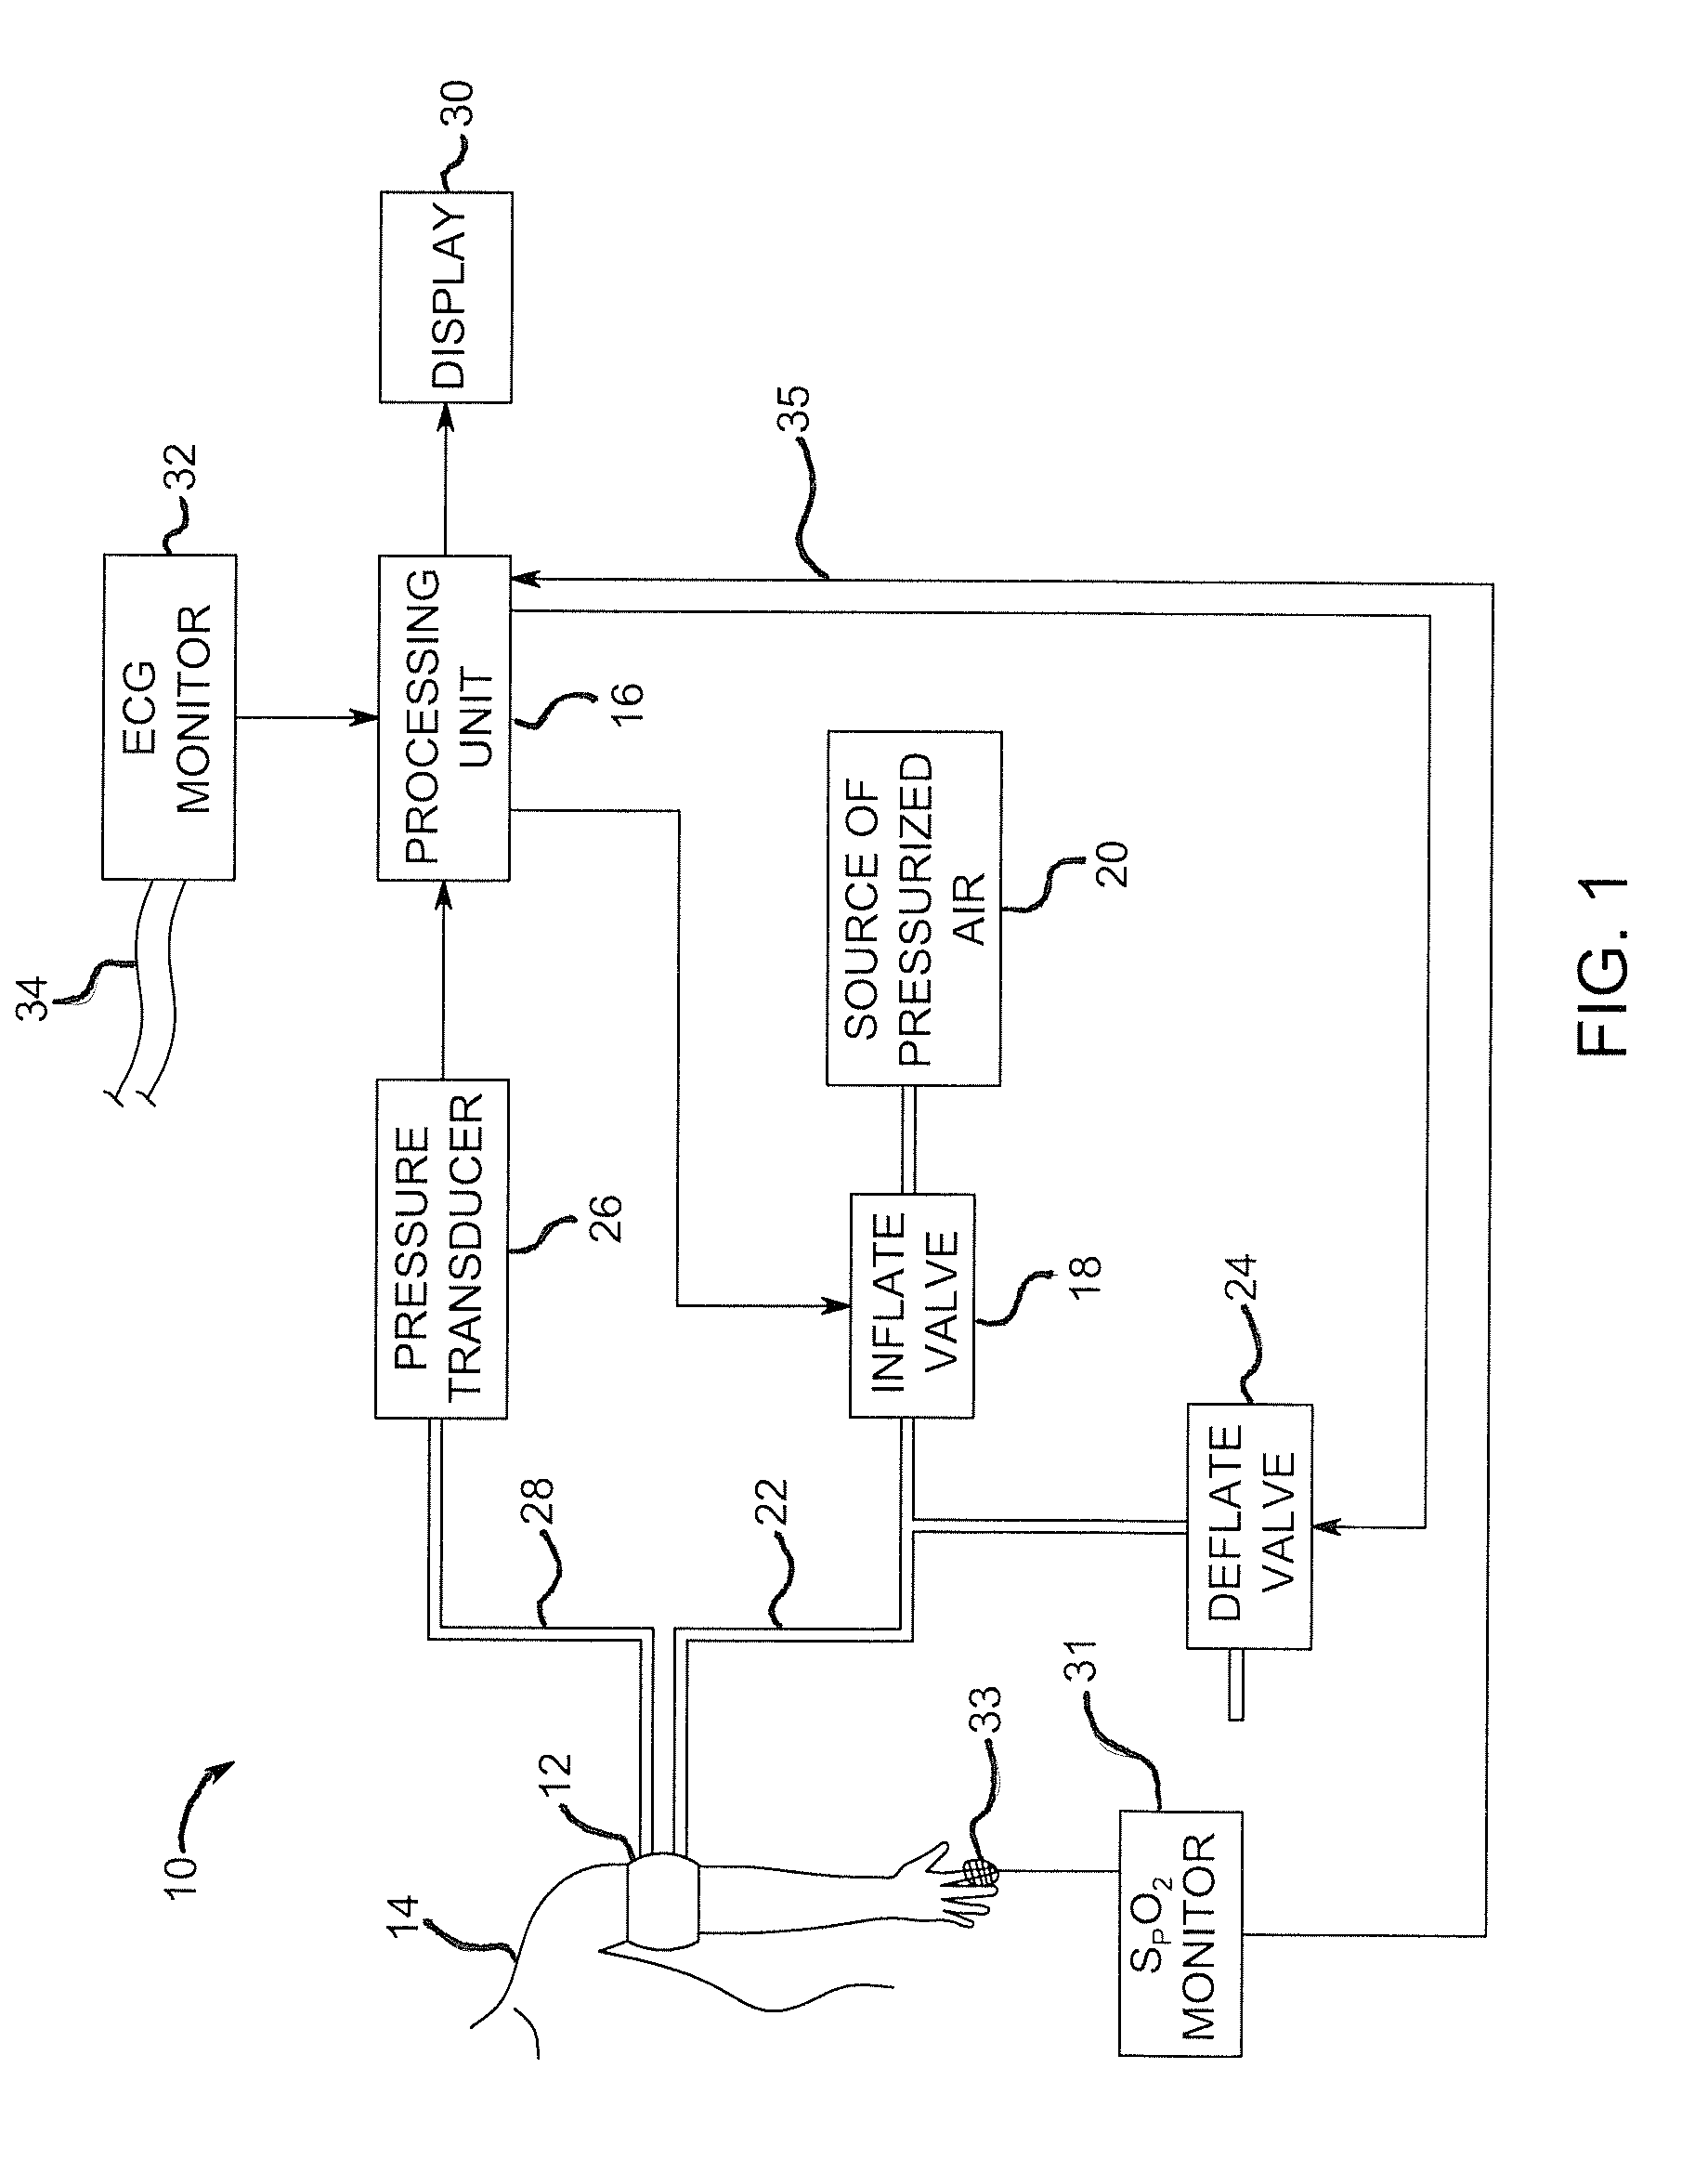 Method and system for controlling non-invasive blood pressure determination based on other physiological parameters